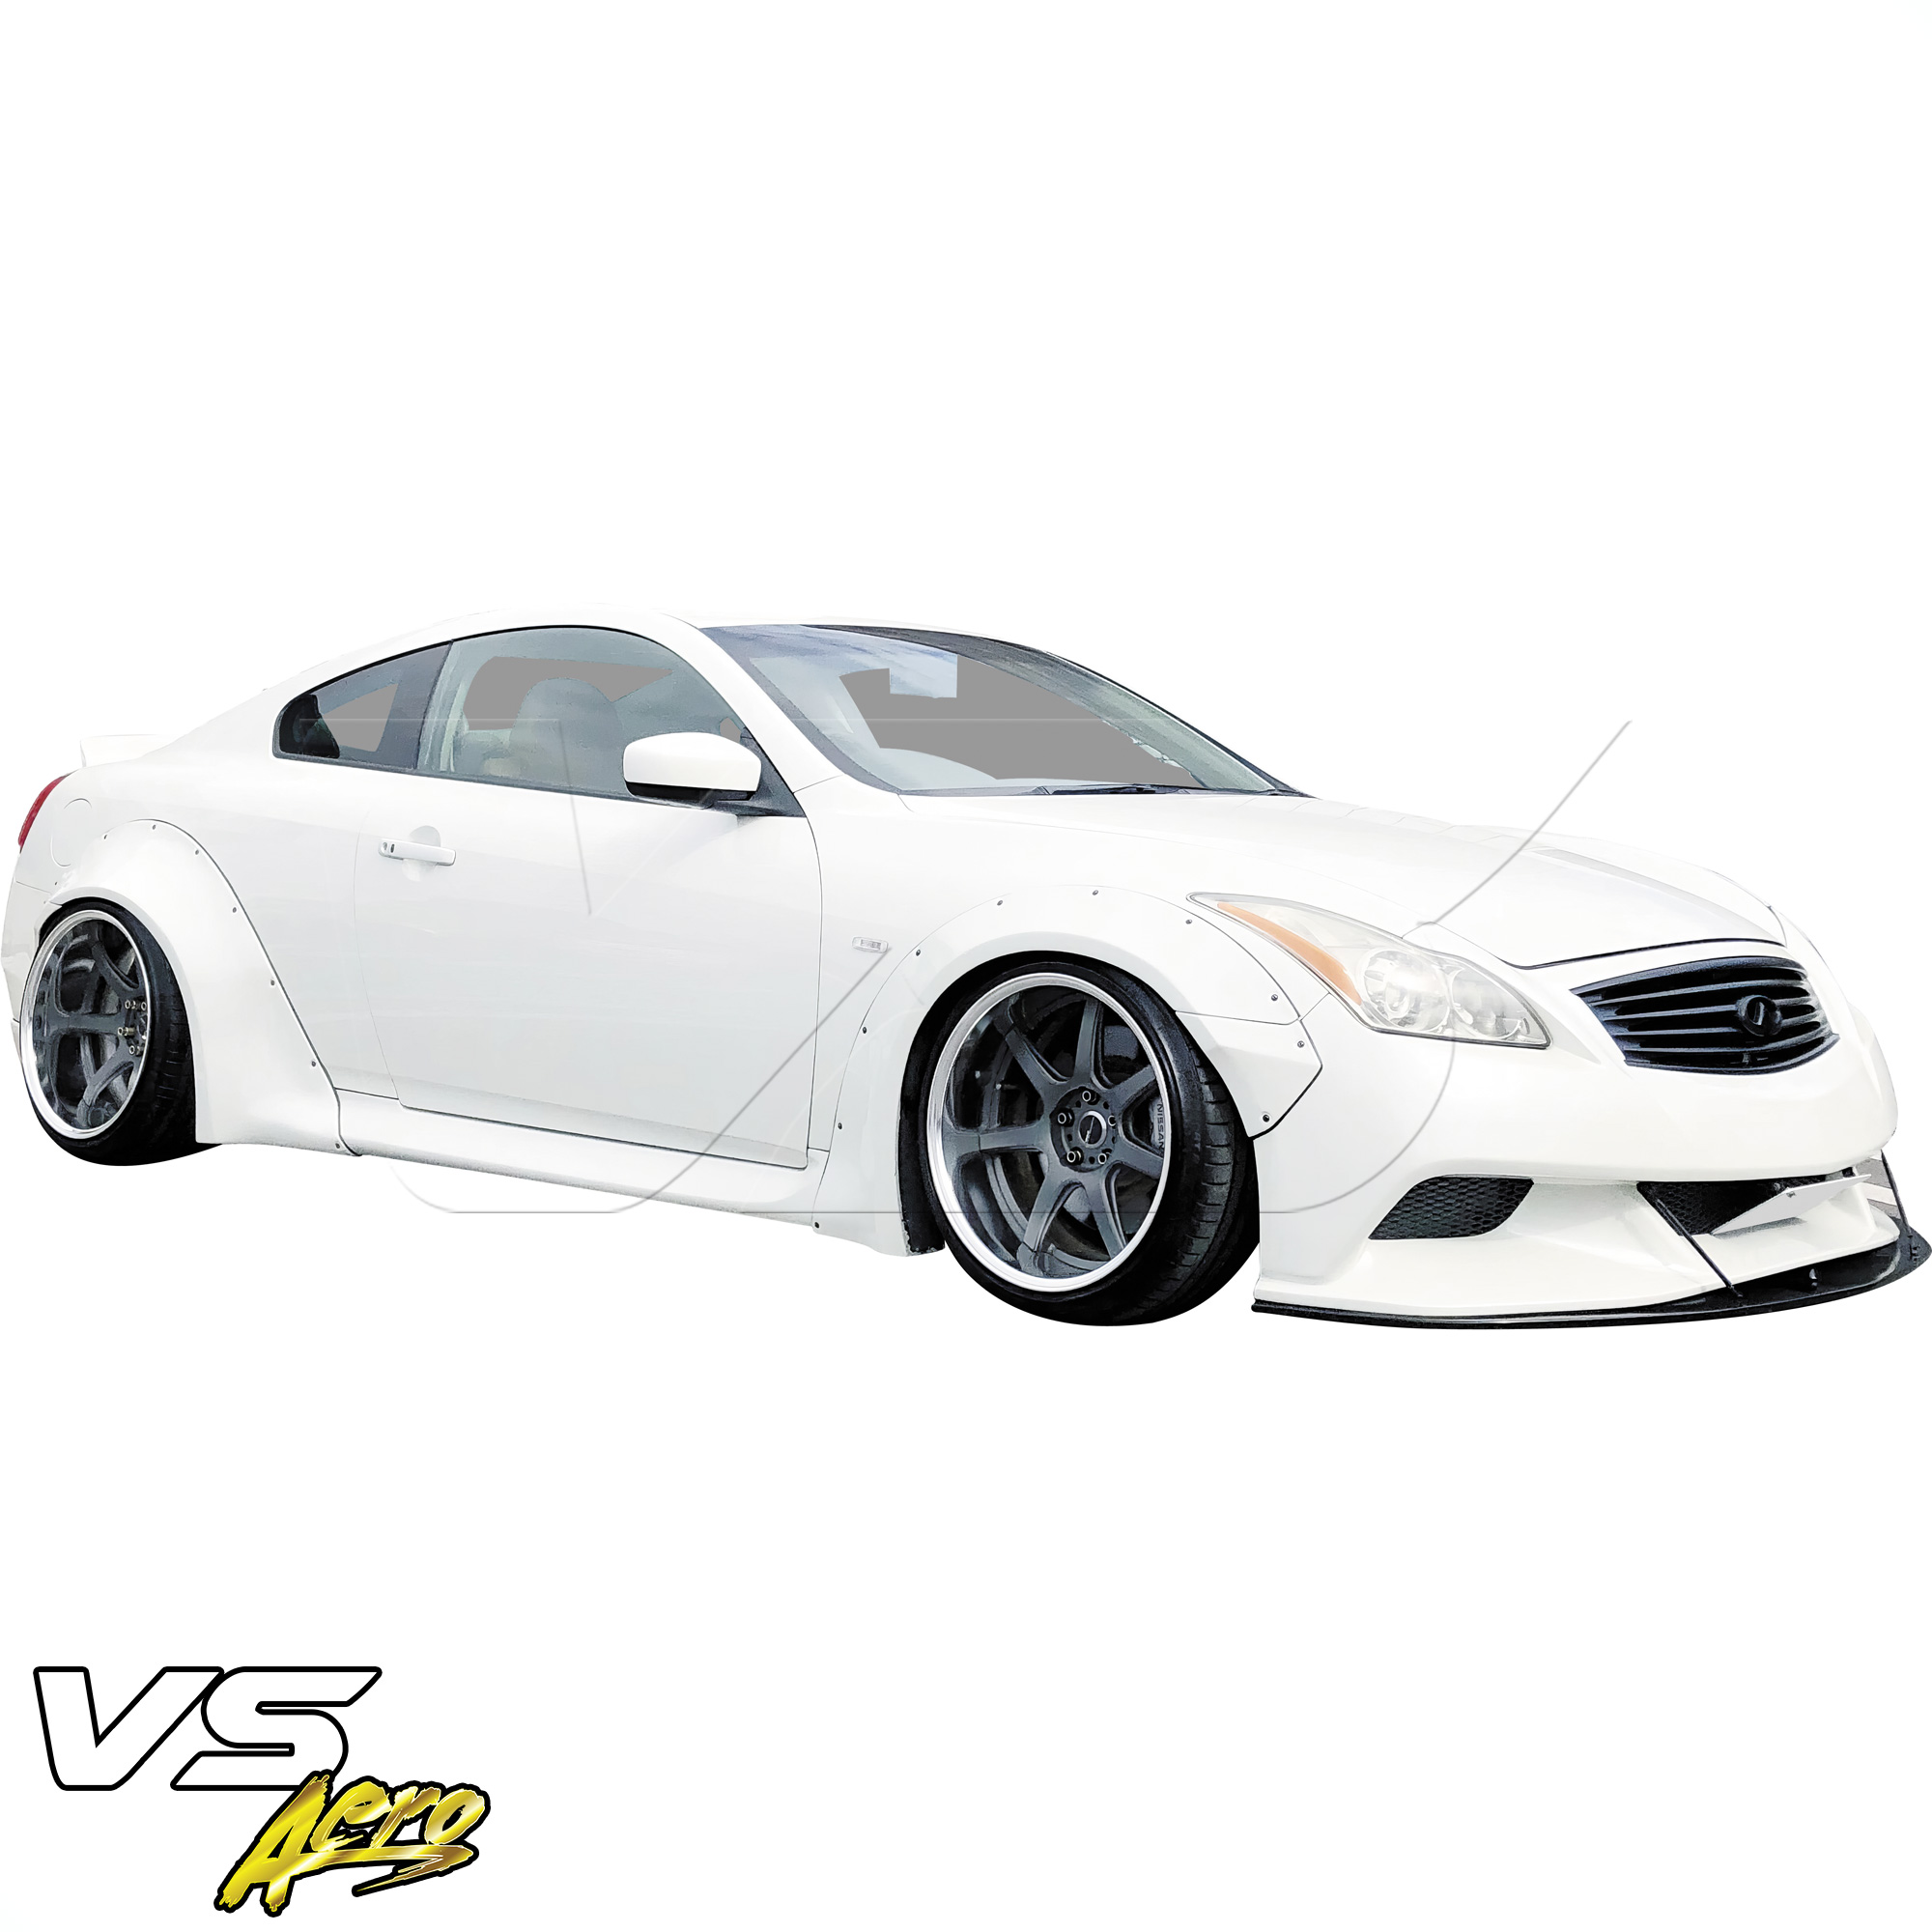 VSaero FRP LBPE Wide Body Fender Flares (front) 4pc > Infiniti G37 Coupe 2008-2015 > 2dr Coupe - Image 36